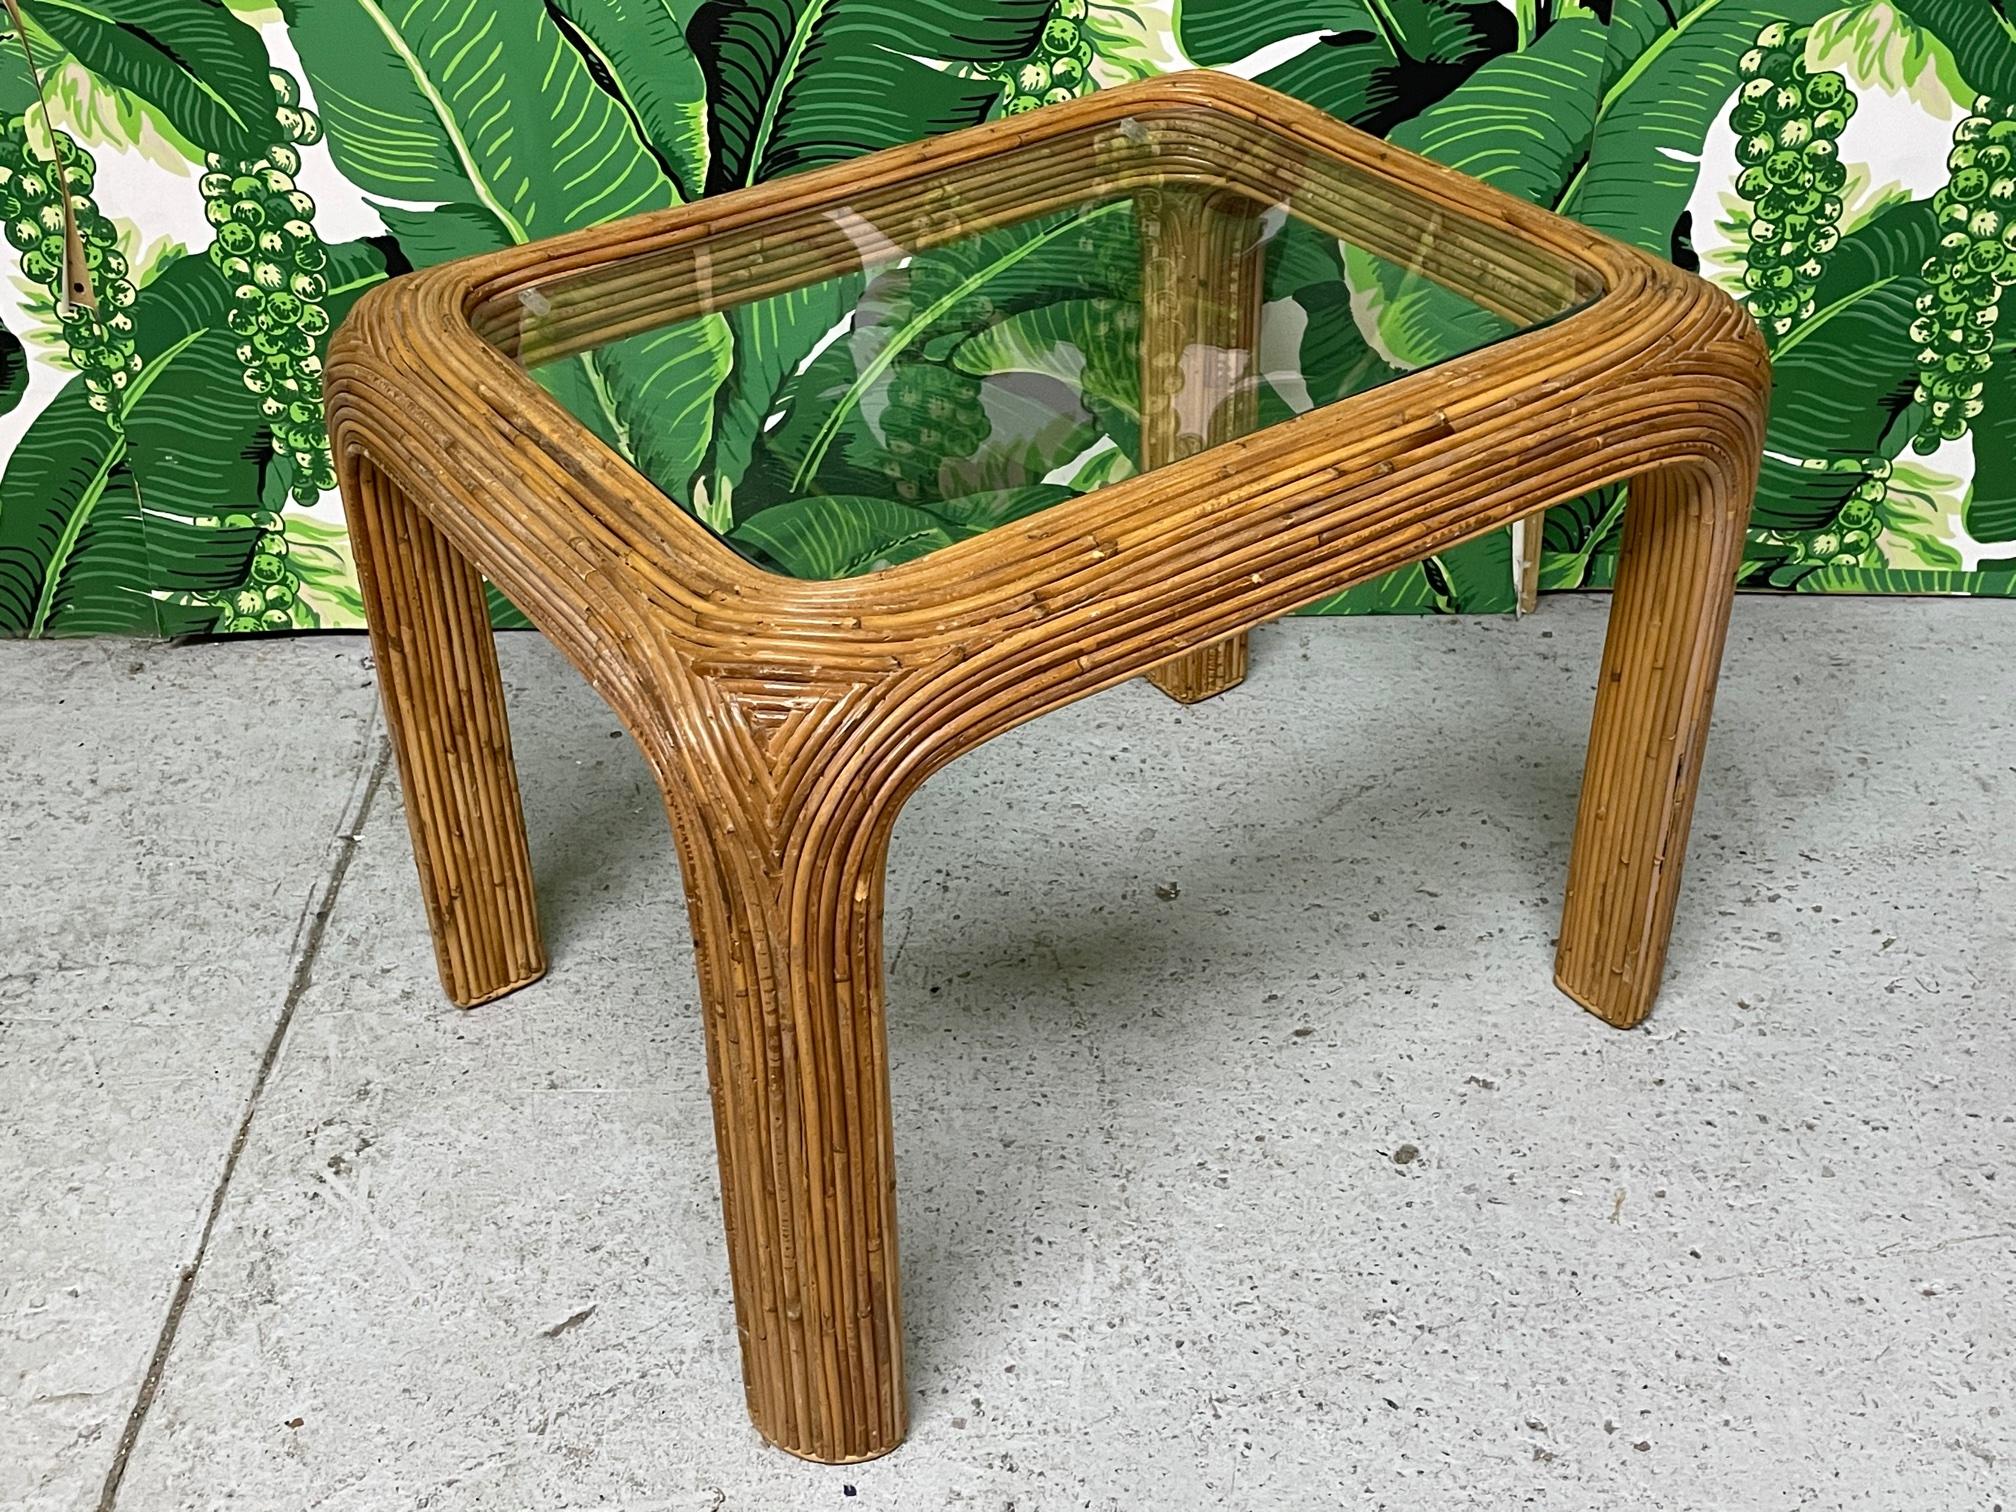 Vintage rattan end table features full veneer of pencil reed rattan and a glass top. Very good condition with minor imperfections consistent with age.